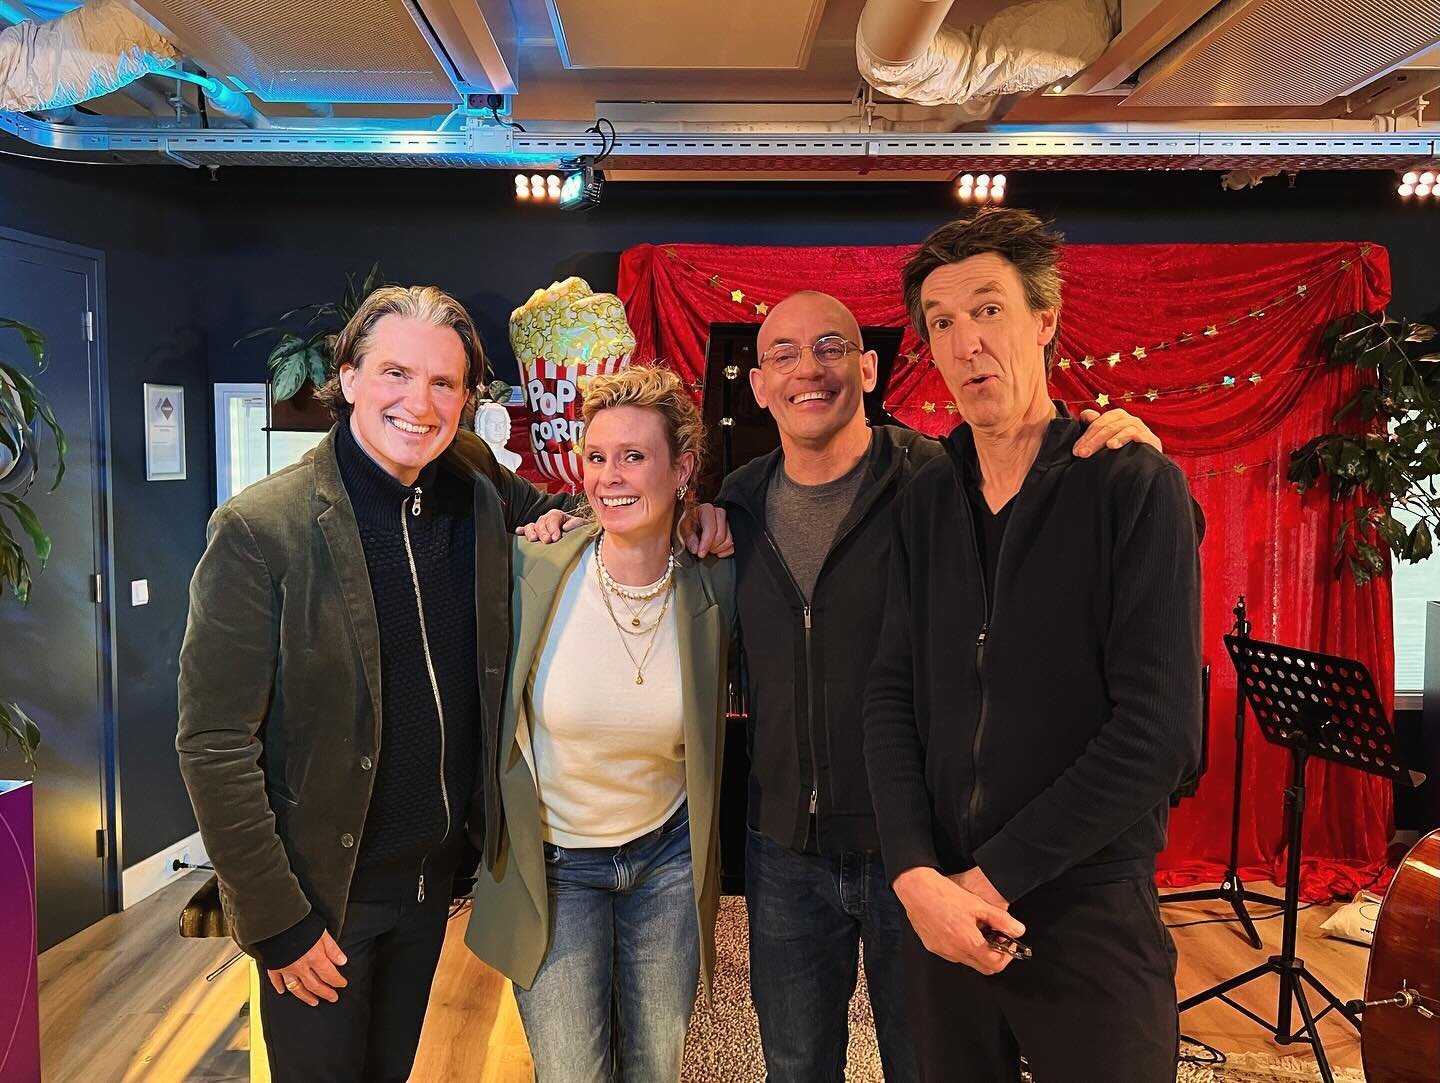 Today we gave a short on air live #performance and #radiointerview with the inspiring #MaartjeStokkers for the #Npo #classical music station in The Netherlands. It was great to perform for live radio! #europeanjazztrio #jazztrio #jazz #ntr #npoklassi